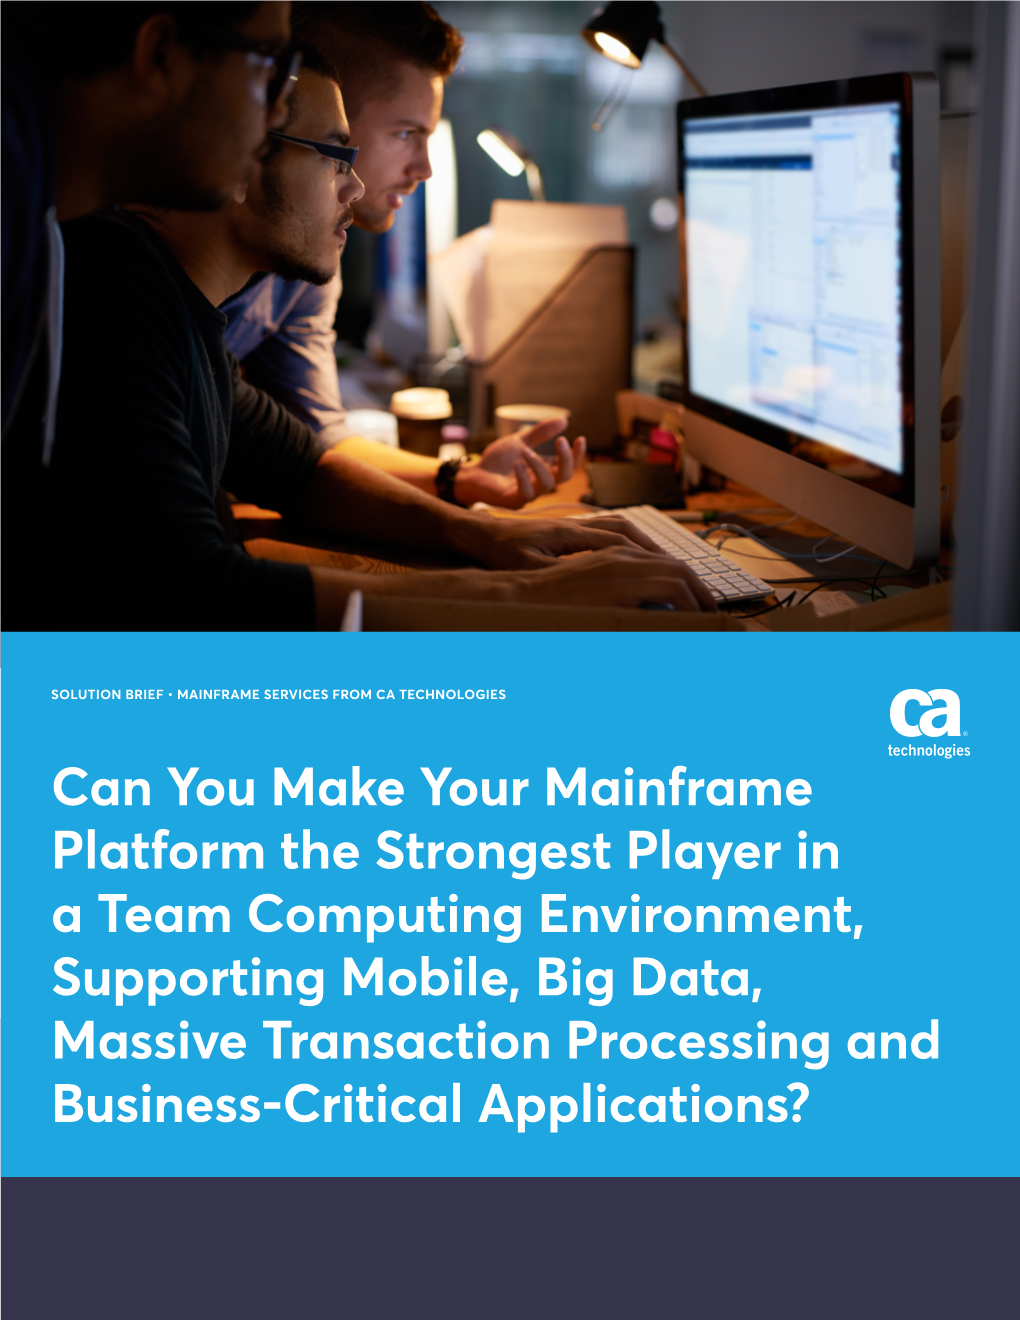 Mainframe Services from Ca Technologies